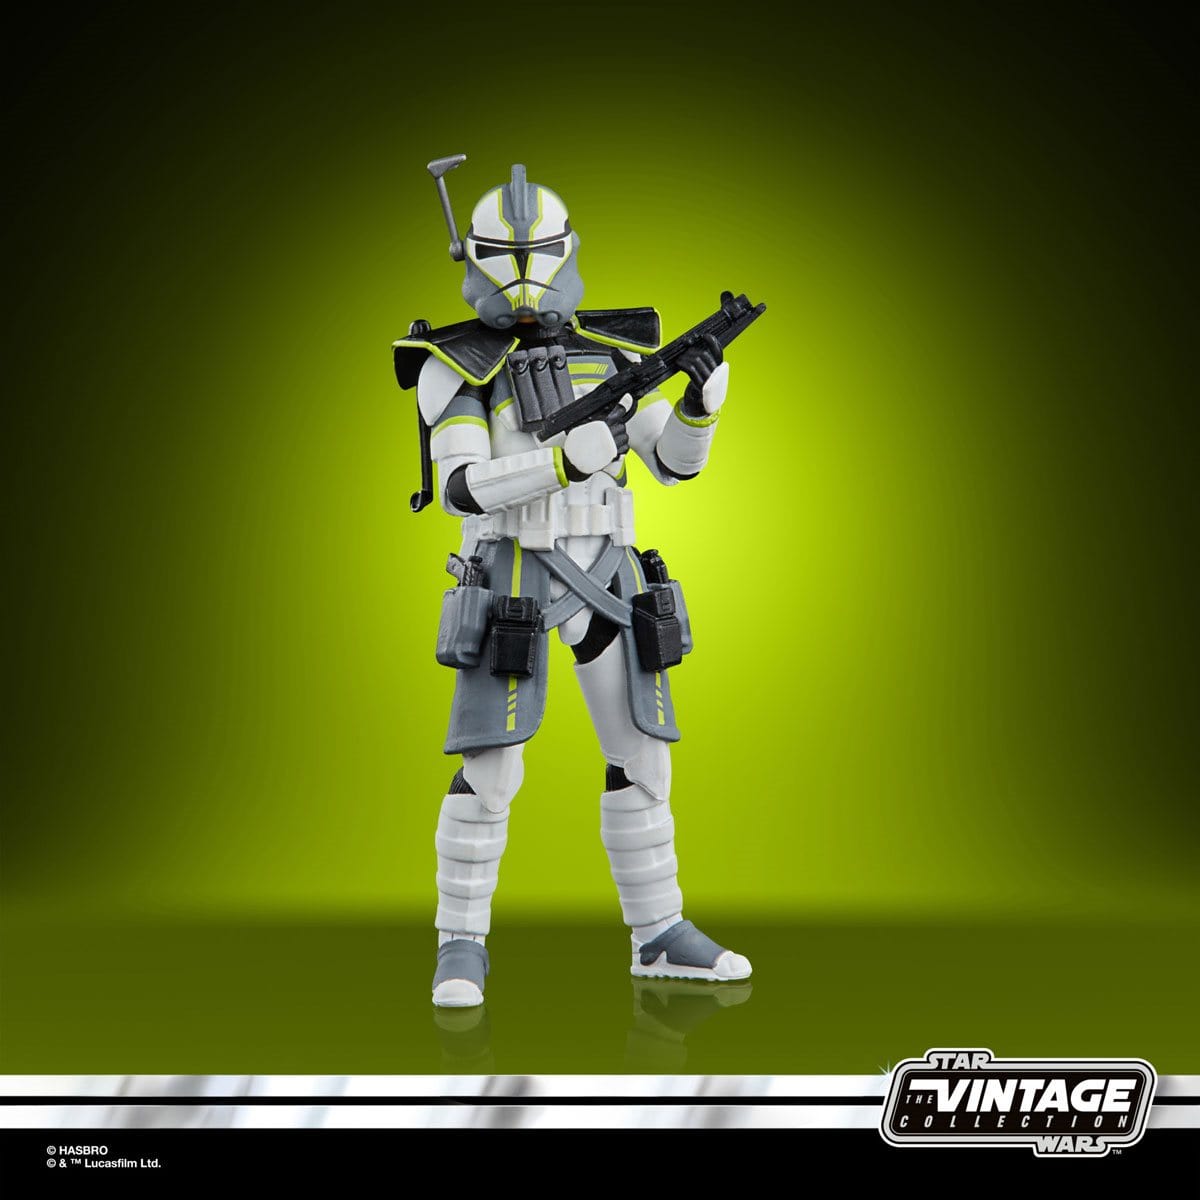 Star Wars The Vintage Collection Gaming Greats ARC Trooper (Lambent Seeker) 3 3/4-Inch Action Figure